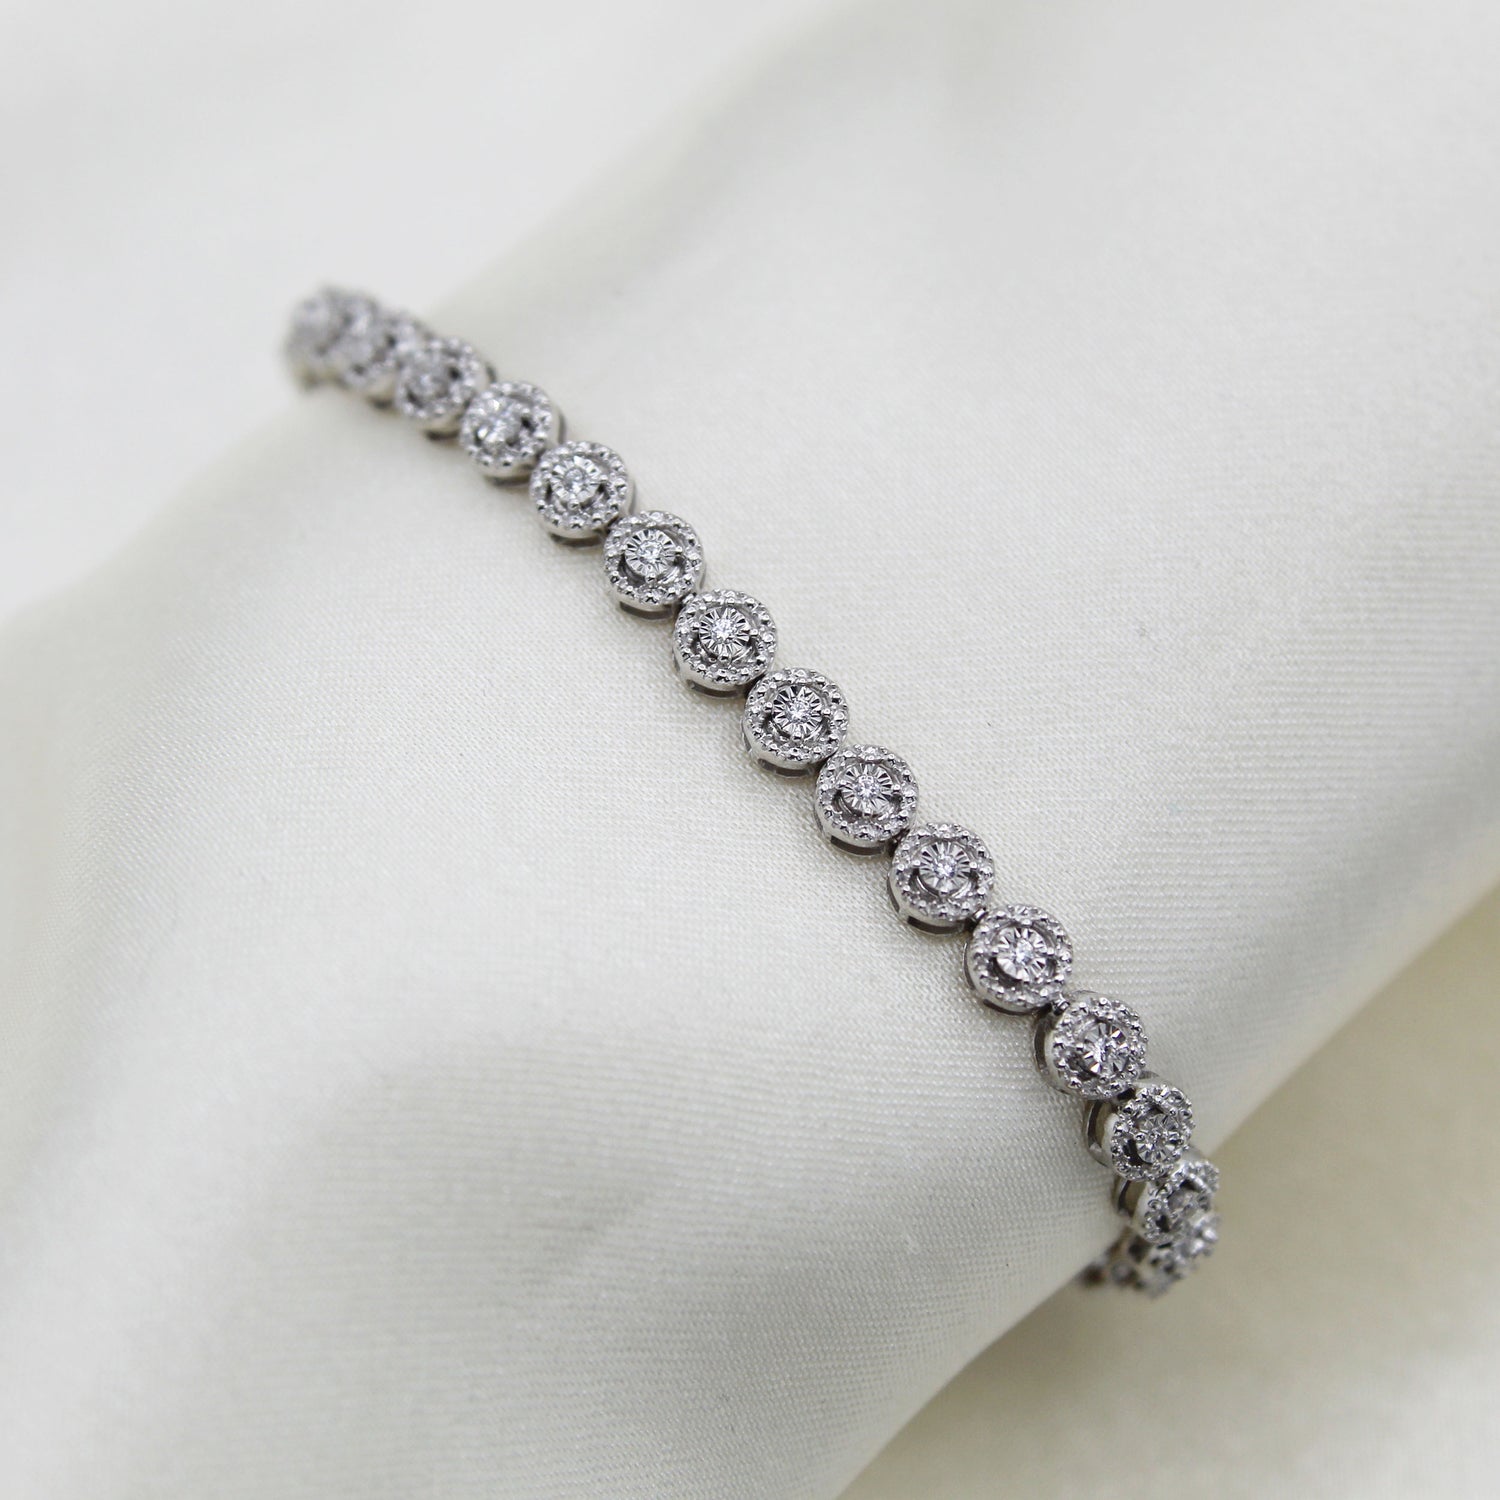 1.0 CT TW Diamond Round Tennis Bracelet in Sterling Silver by Fifth and Fine